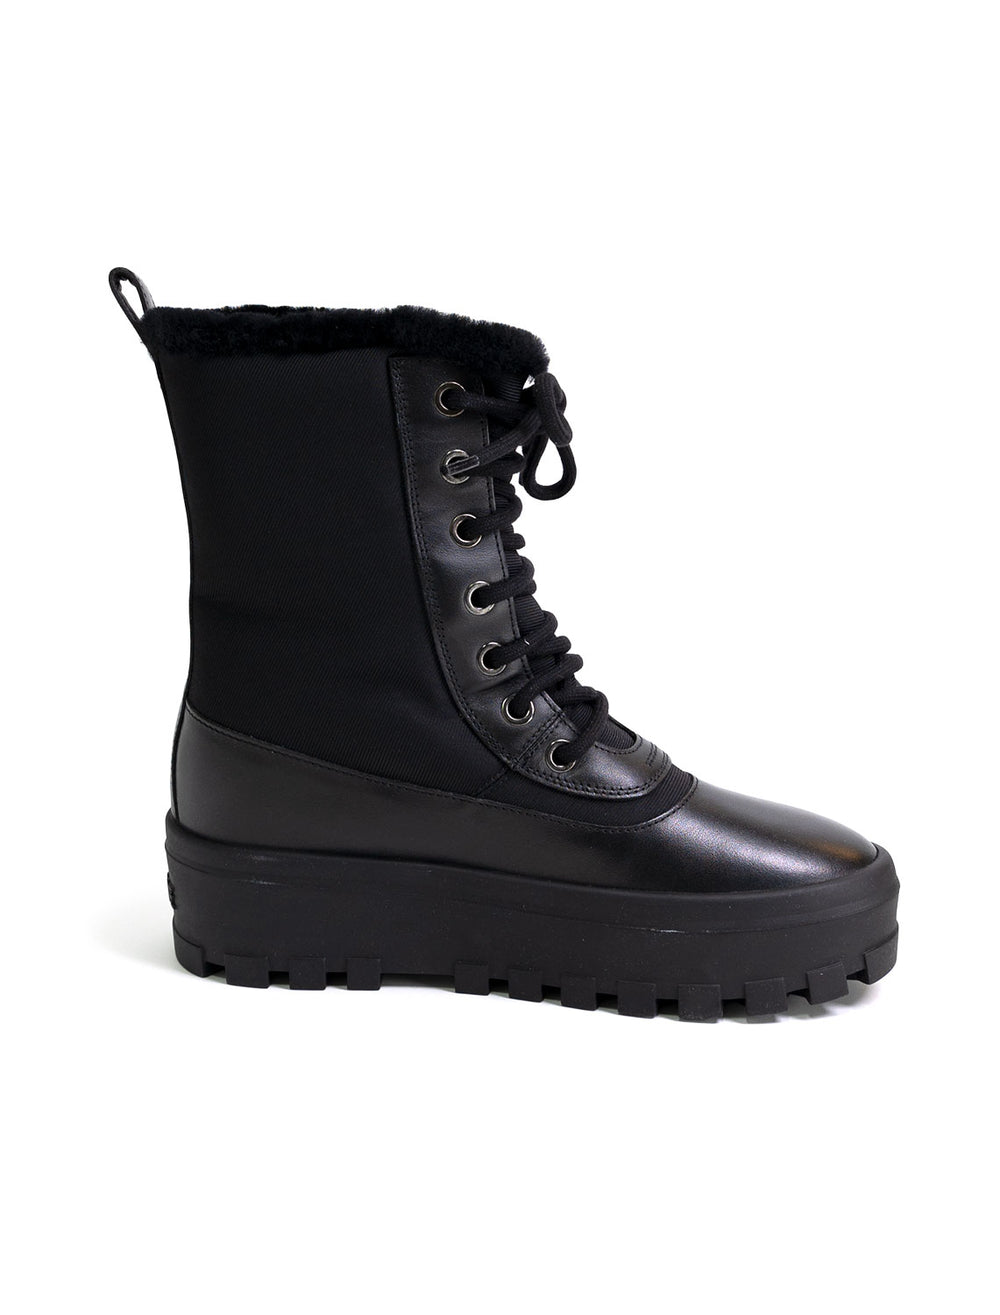 Side view of Mackage's hero boots in black.